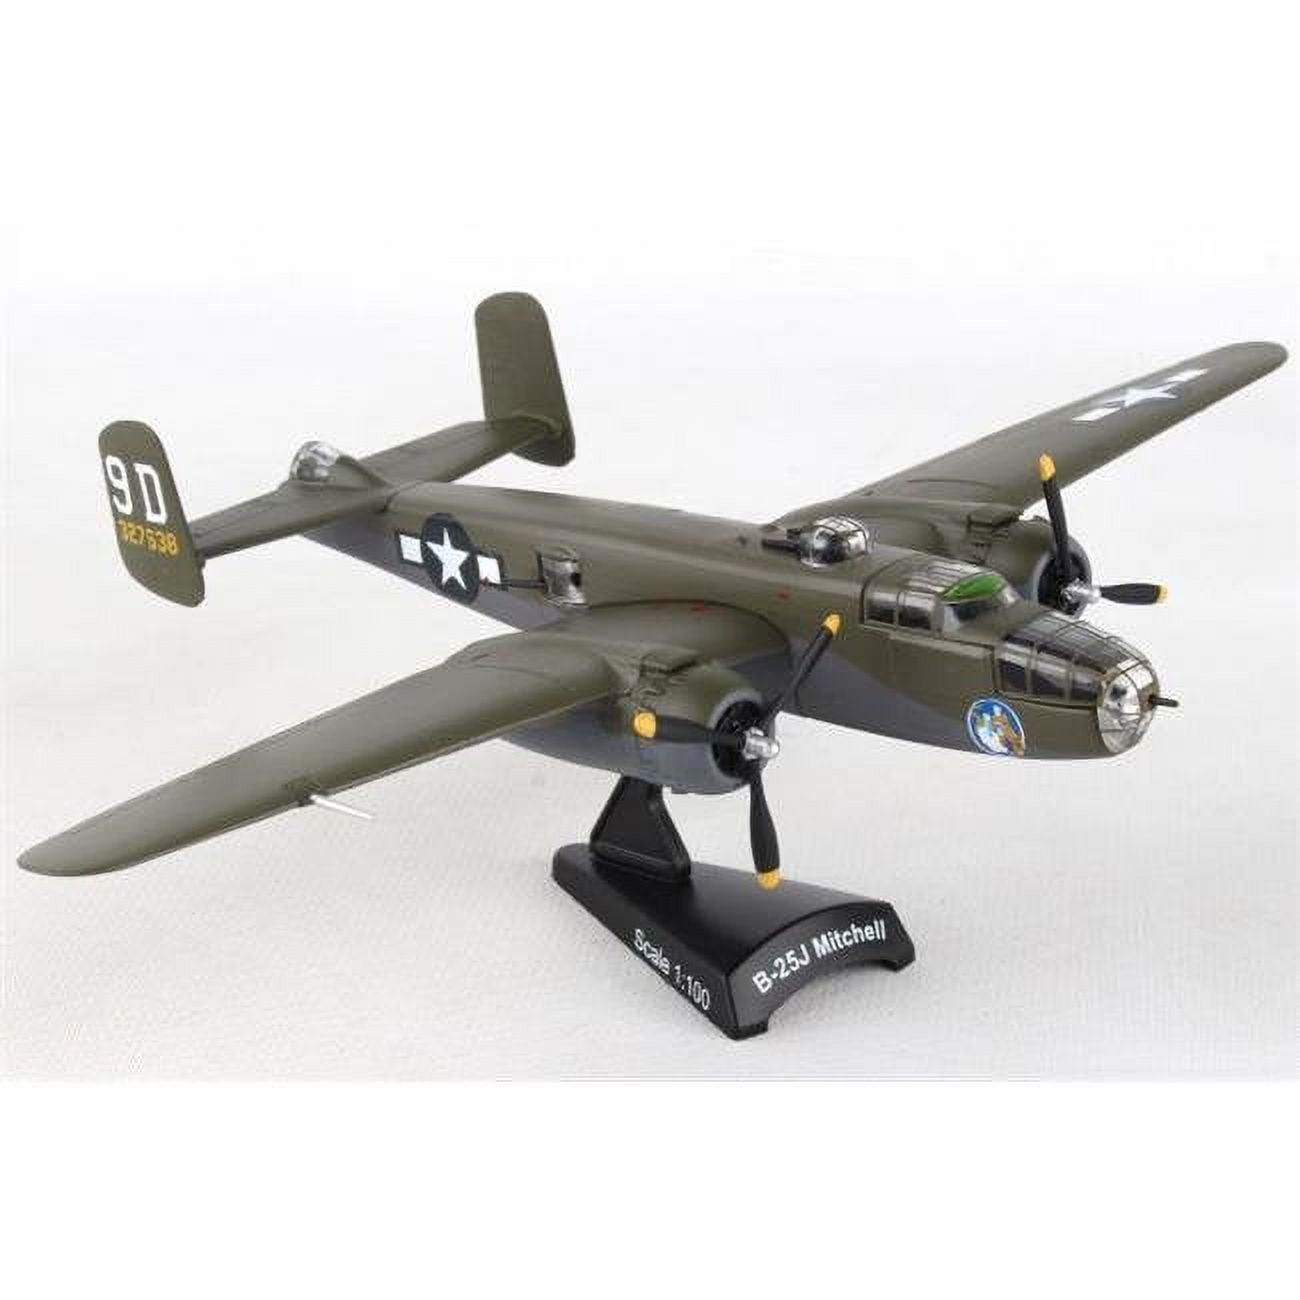 Ps5403-5 B25j 1-100 Briefing Time Diecast Airplane Model